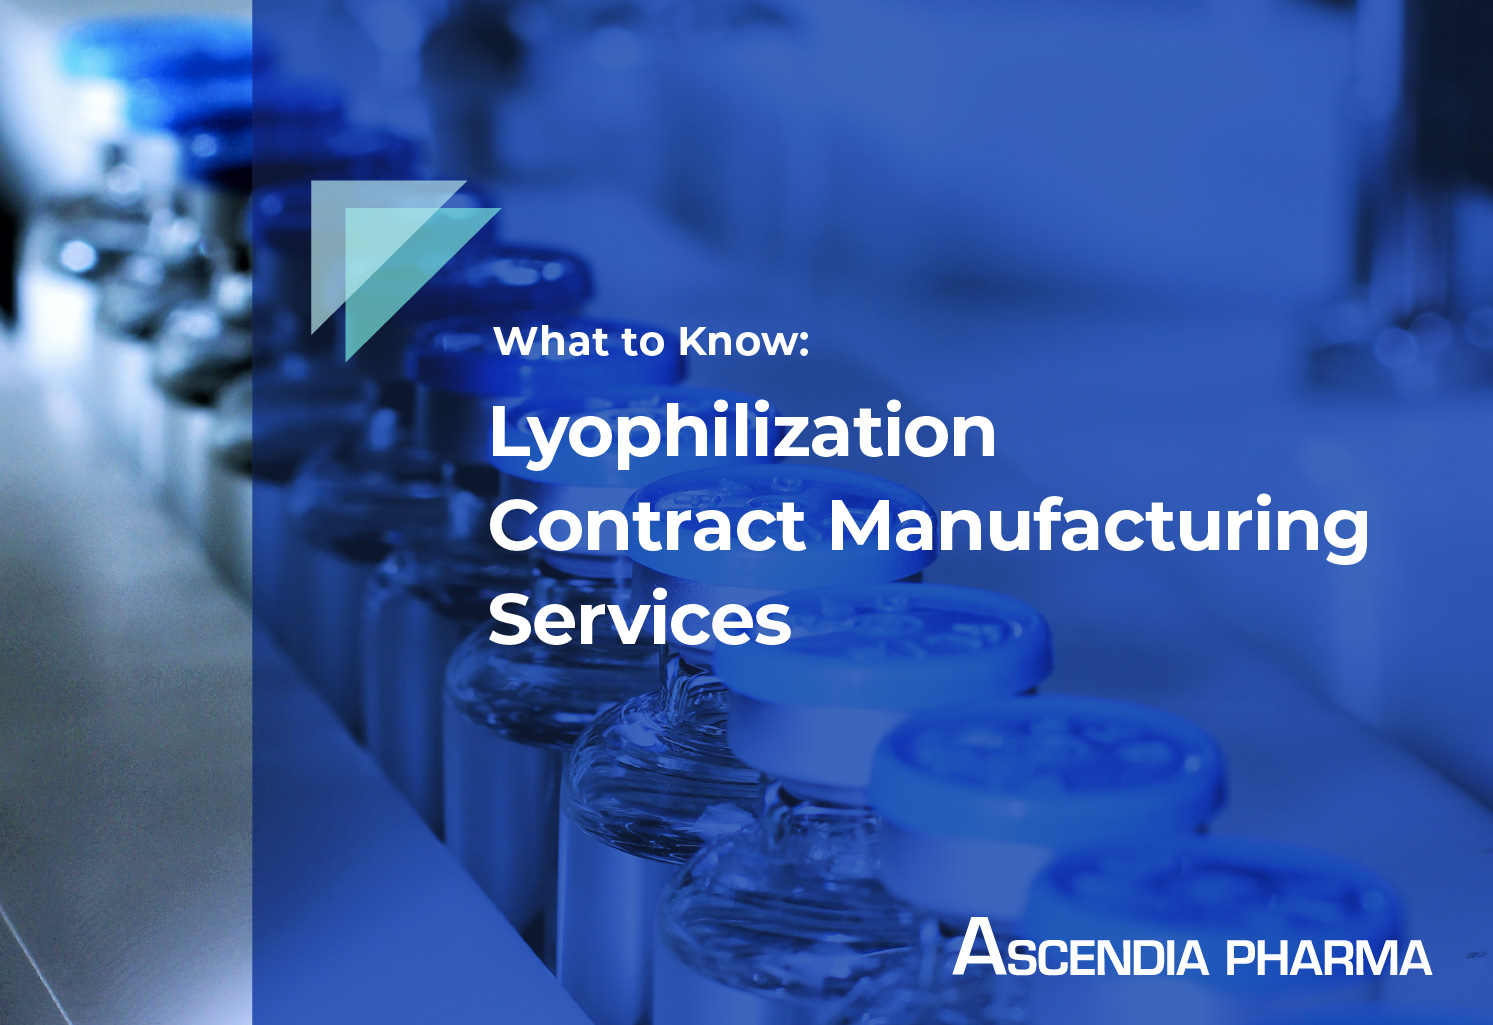 What to Know About Lyophilization Contract Manufacturing